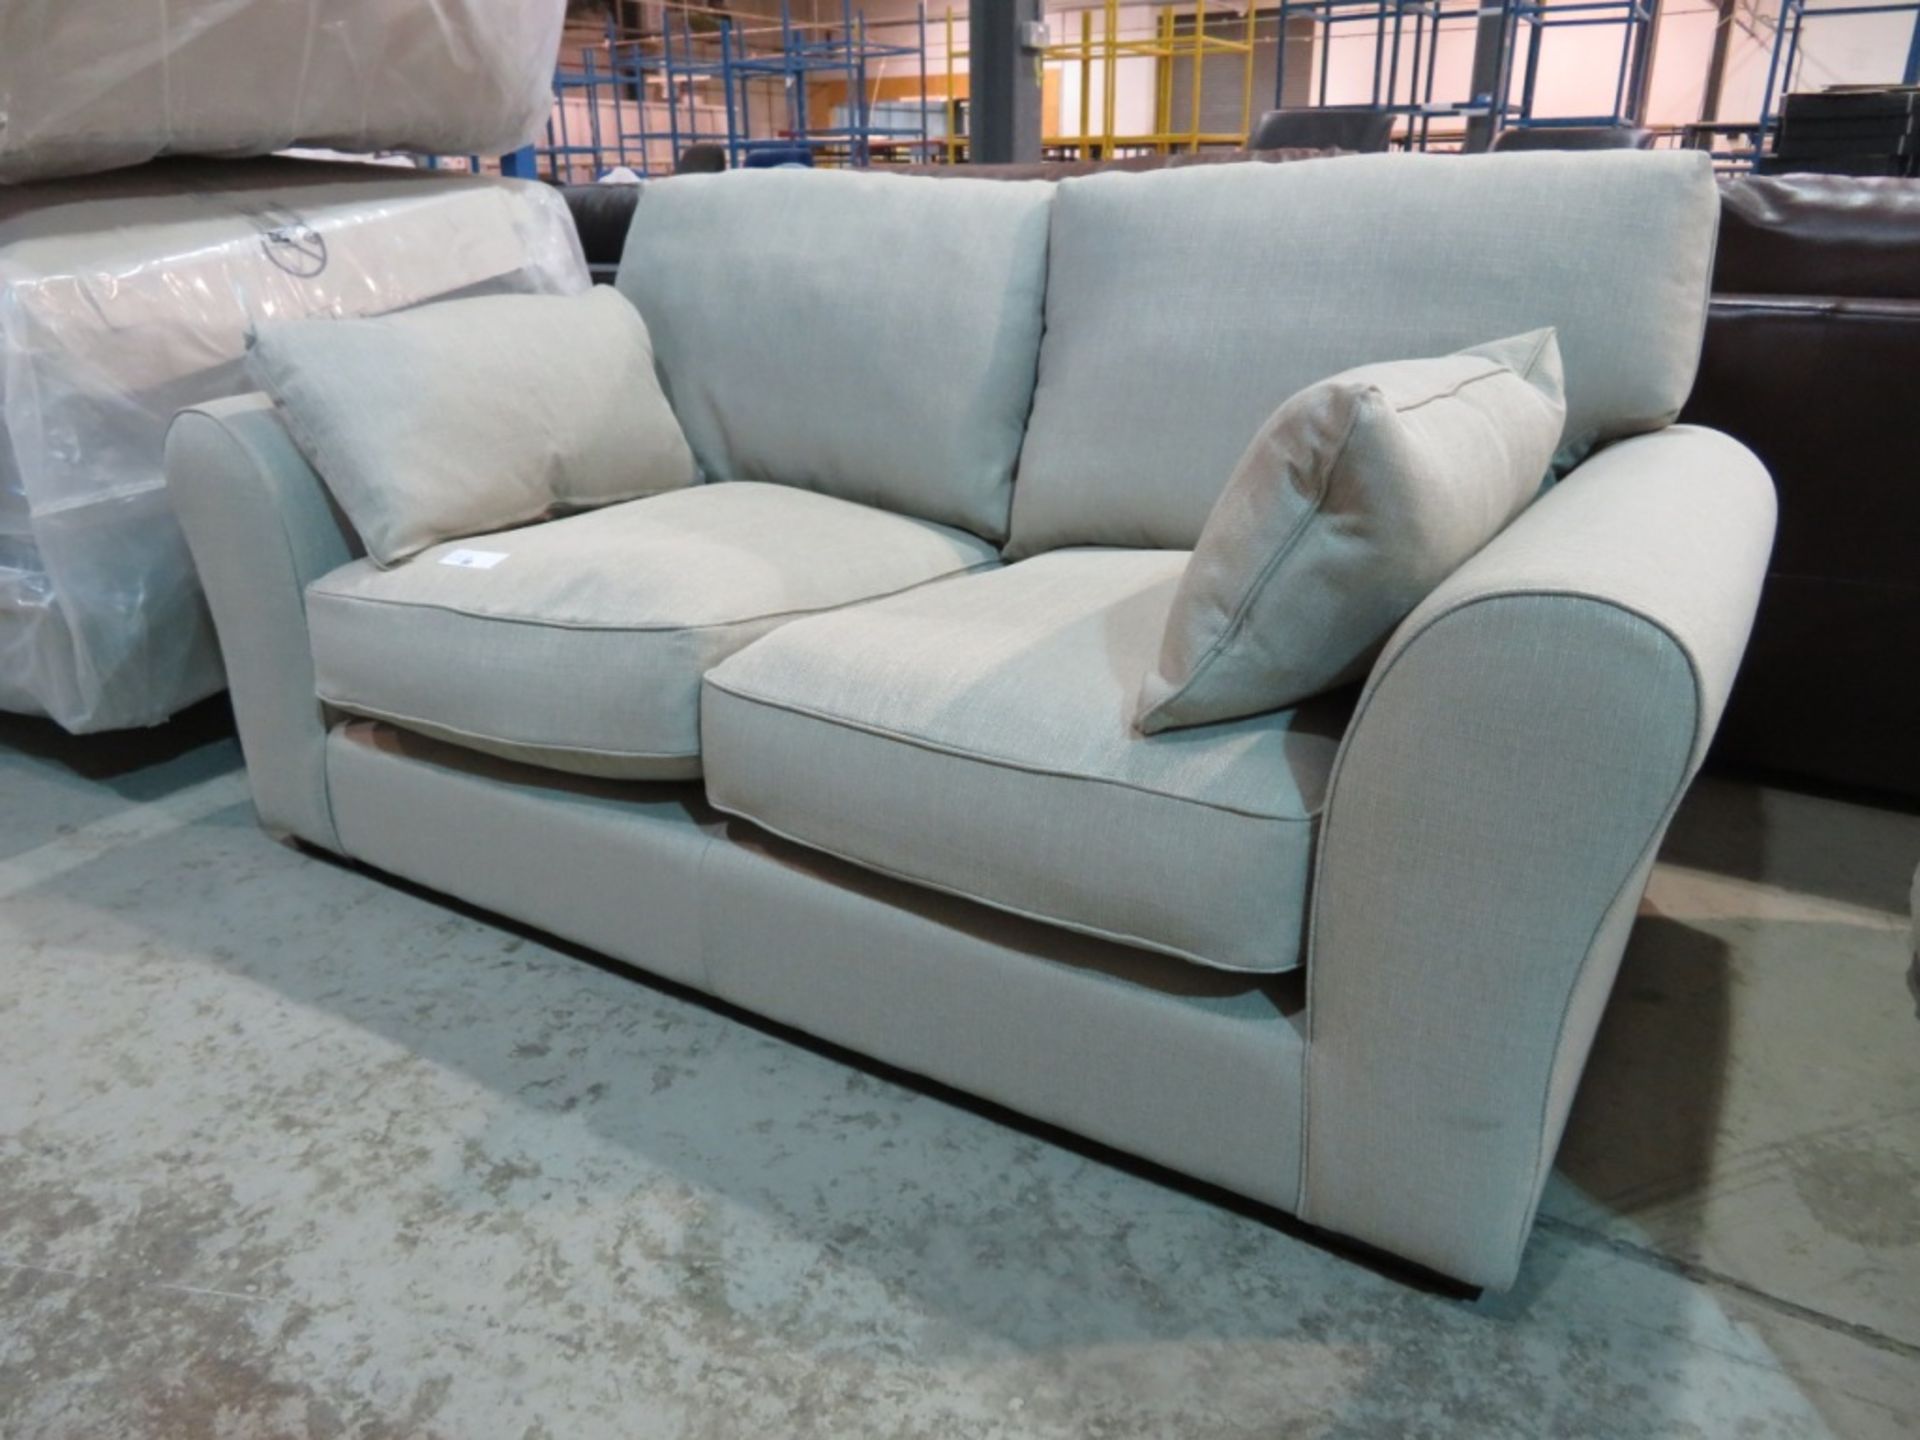 2 Seater beige sofa. New in factory wrapping - 1770 x 960mm (LxD) - Bild 2 aus 4